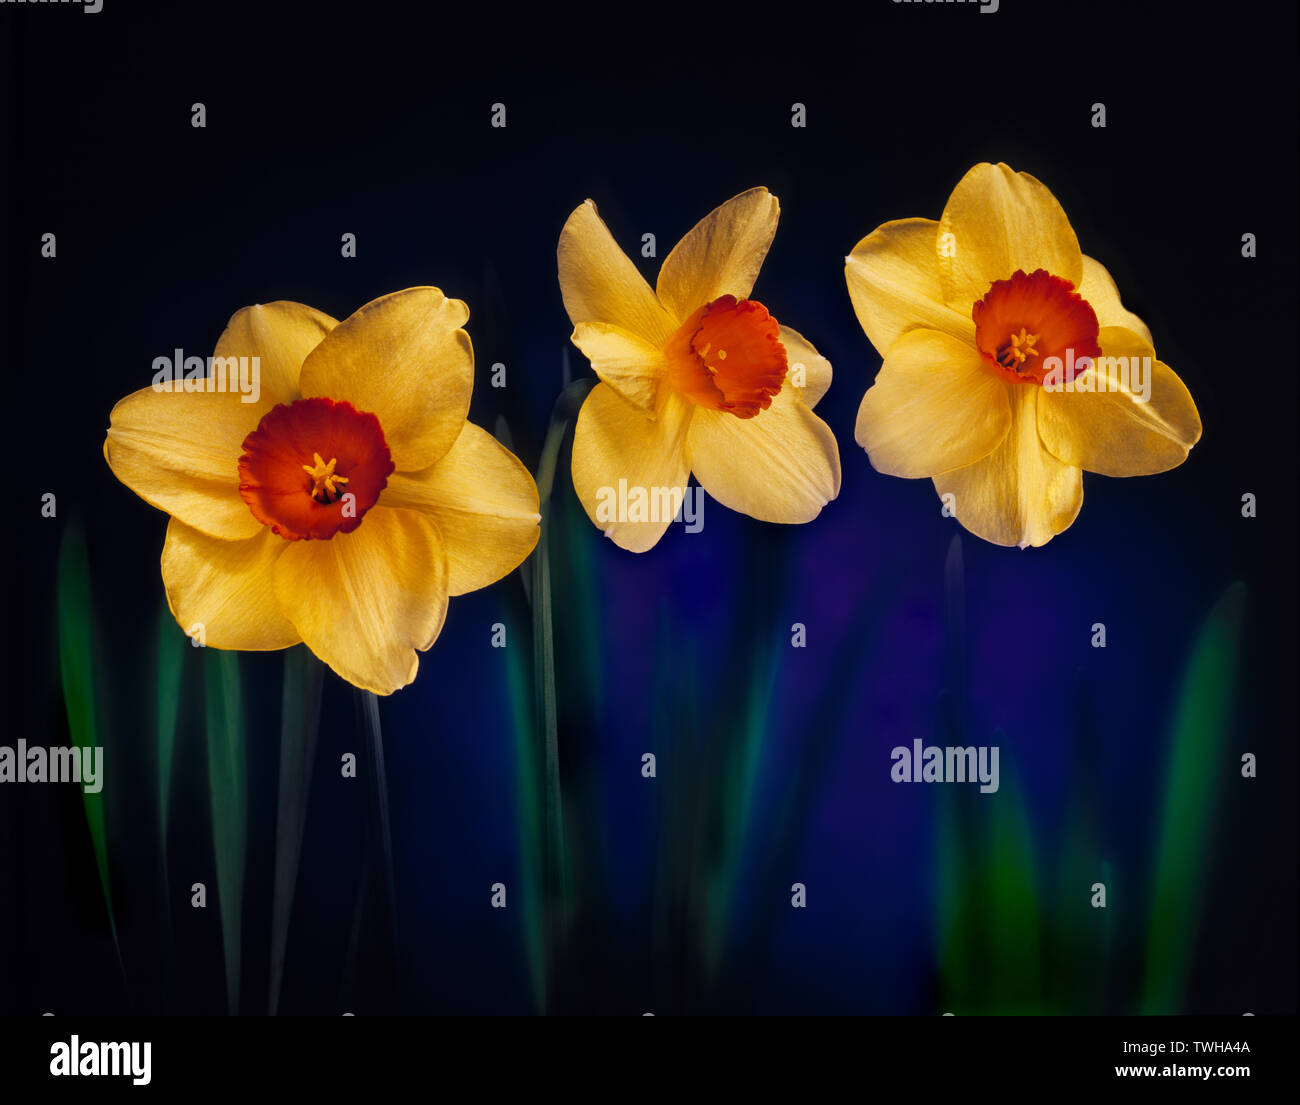 Three jonquils in full bloom, from a light painted series of florals in studio. Stock Photo